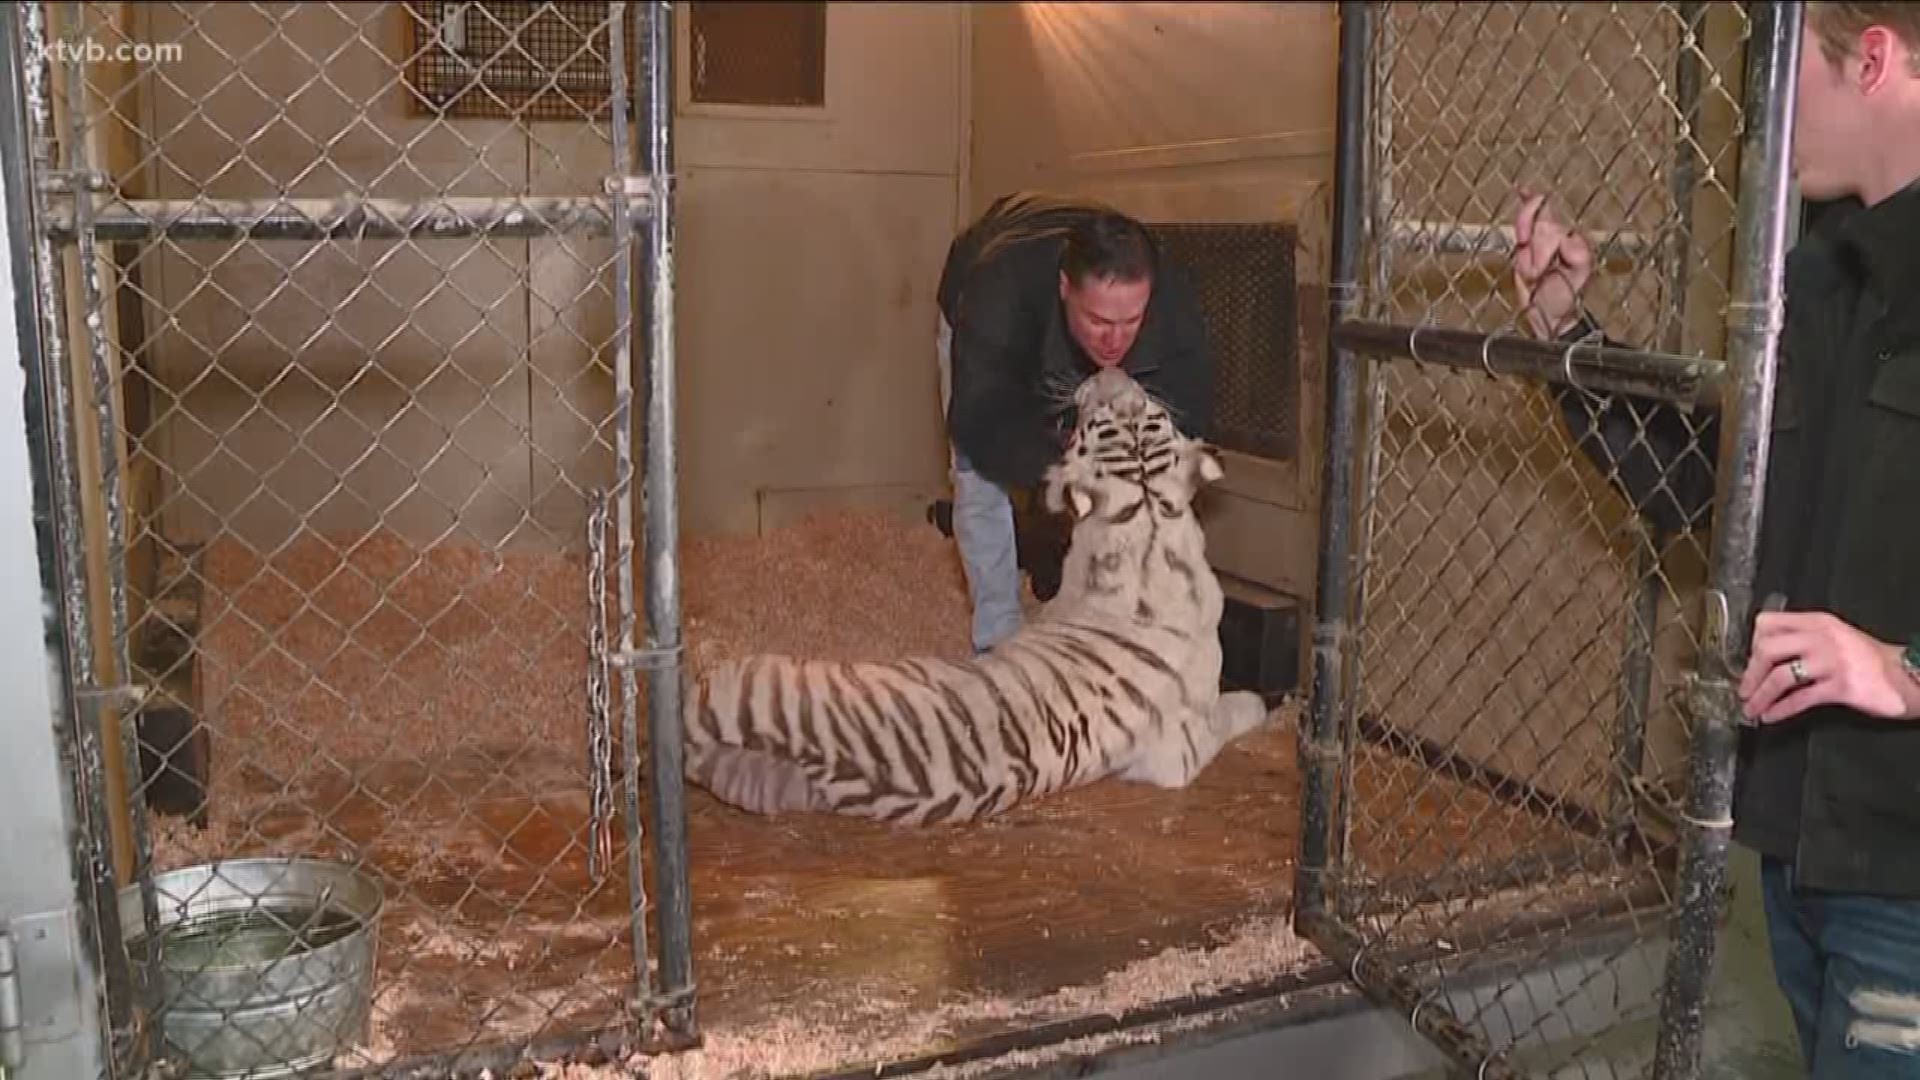 It was a once-in-a-lifetime opportunity for two Idaho surgeons - one for animals, the other for humans. They were sought out by an illusionist in Montana to save something precious to him - his tiger.